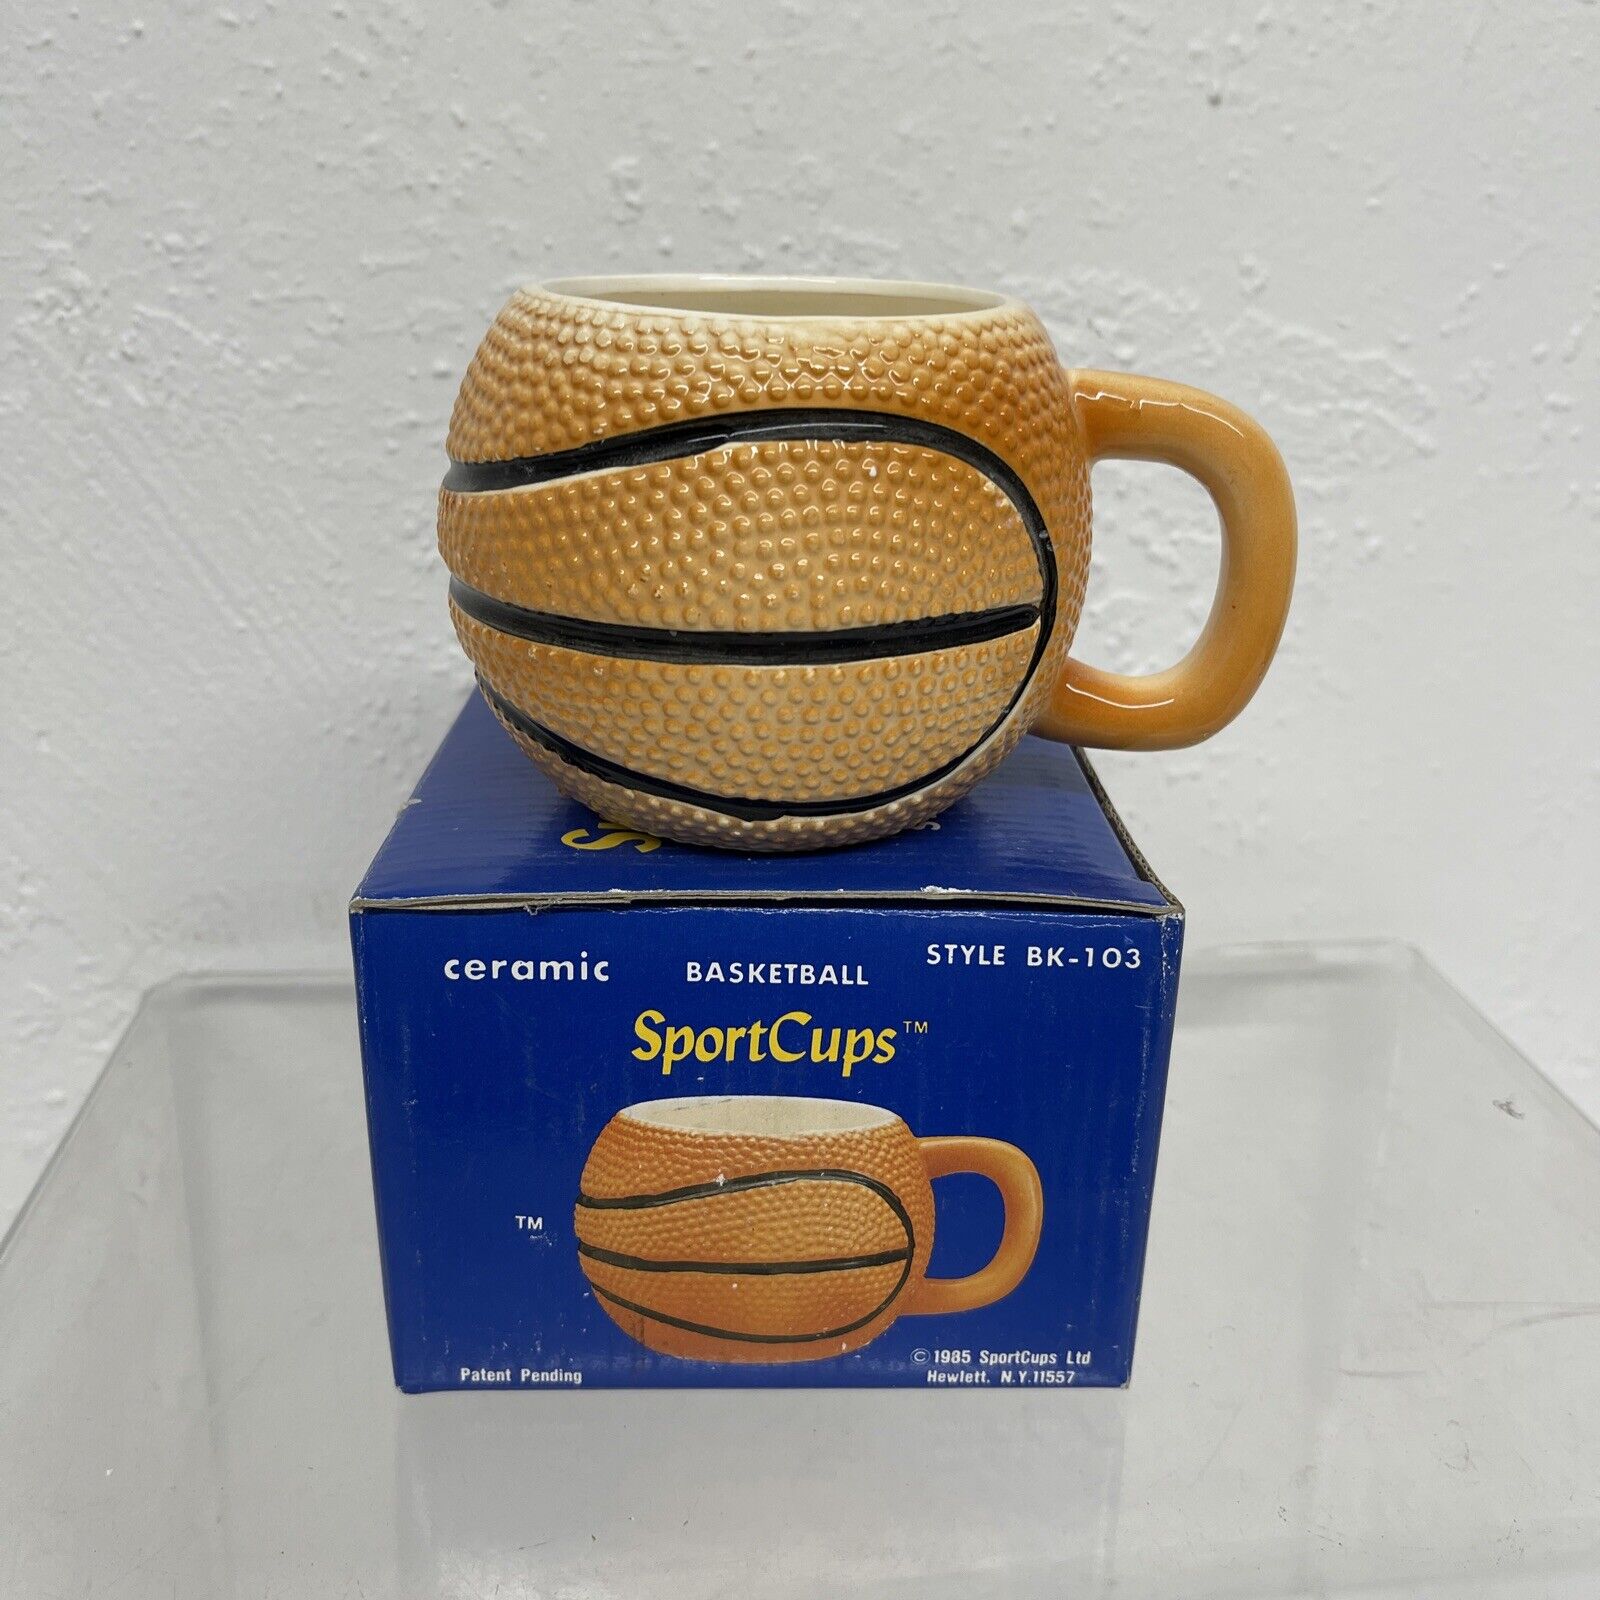 Sportcups Basketball Mug 1985 Coffee Cup Vintage Novelty In Box